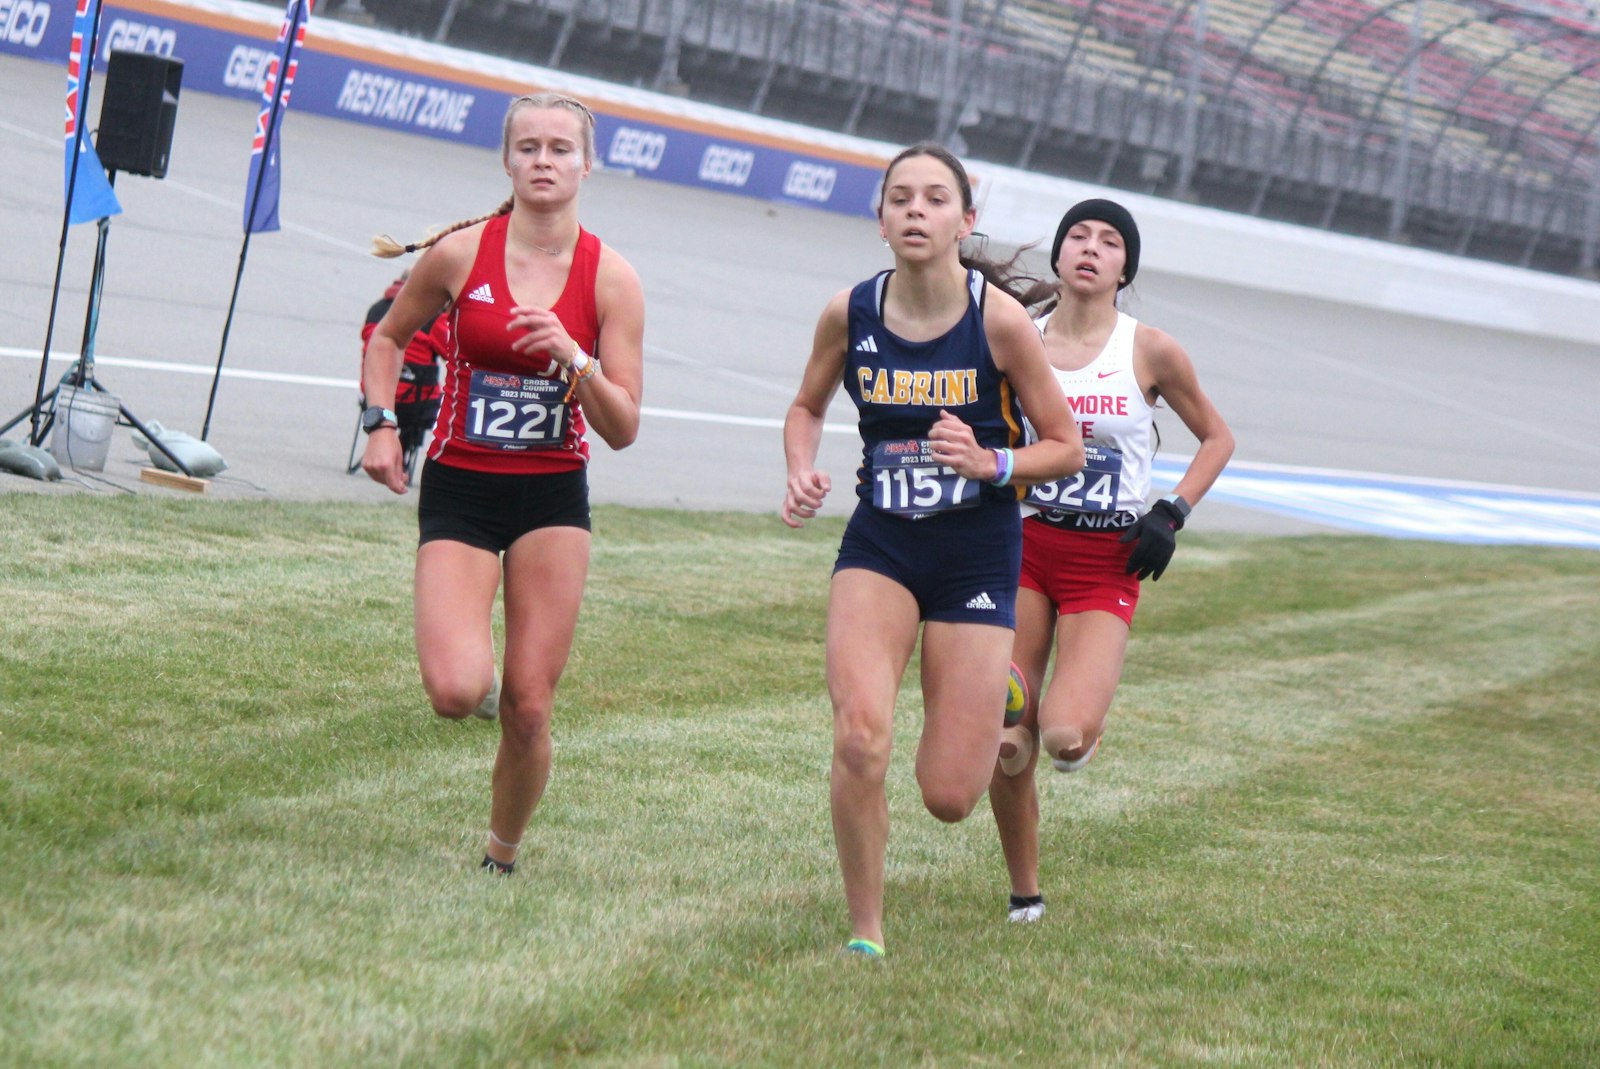 Sprinting to the finish, Allen Park Cabrini senior Ava Teed battles Johannesburg-Lewiston’s Allie Nowak and Whitmore Lake’s Carina Burchi. Teed finished fifth in the Division 4 girls race, netting her fourth all-state honor in as many seasons. (Wright Wilson | Special to Detroit Catholic)